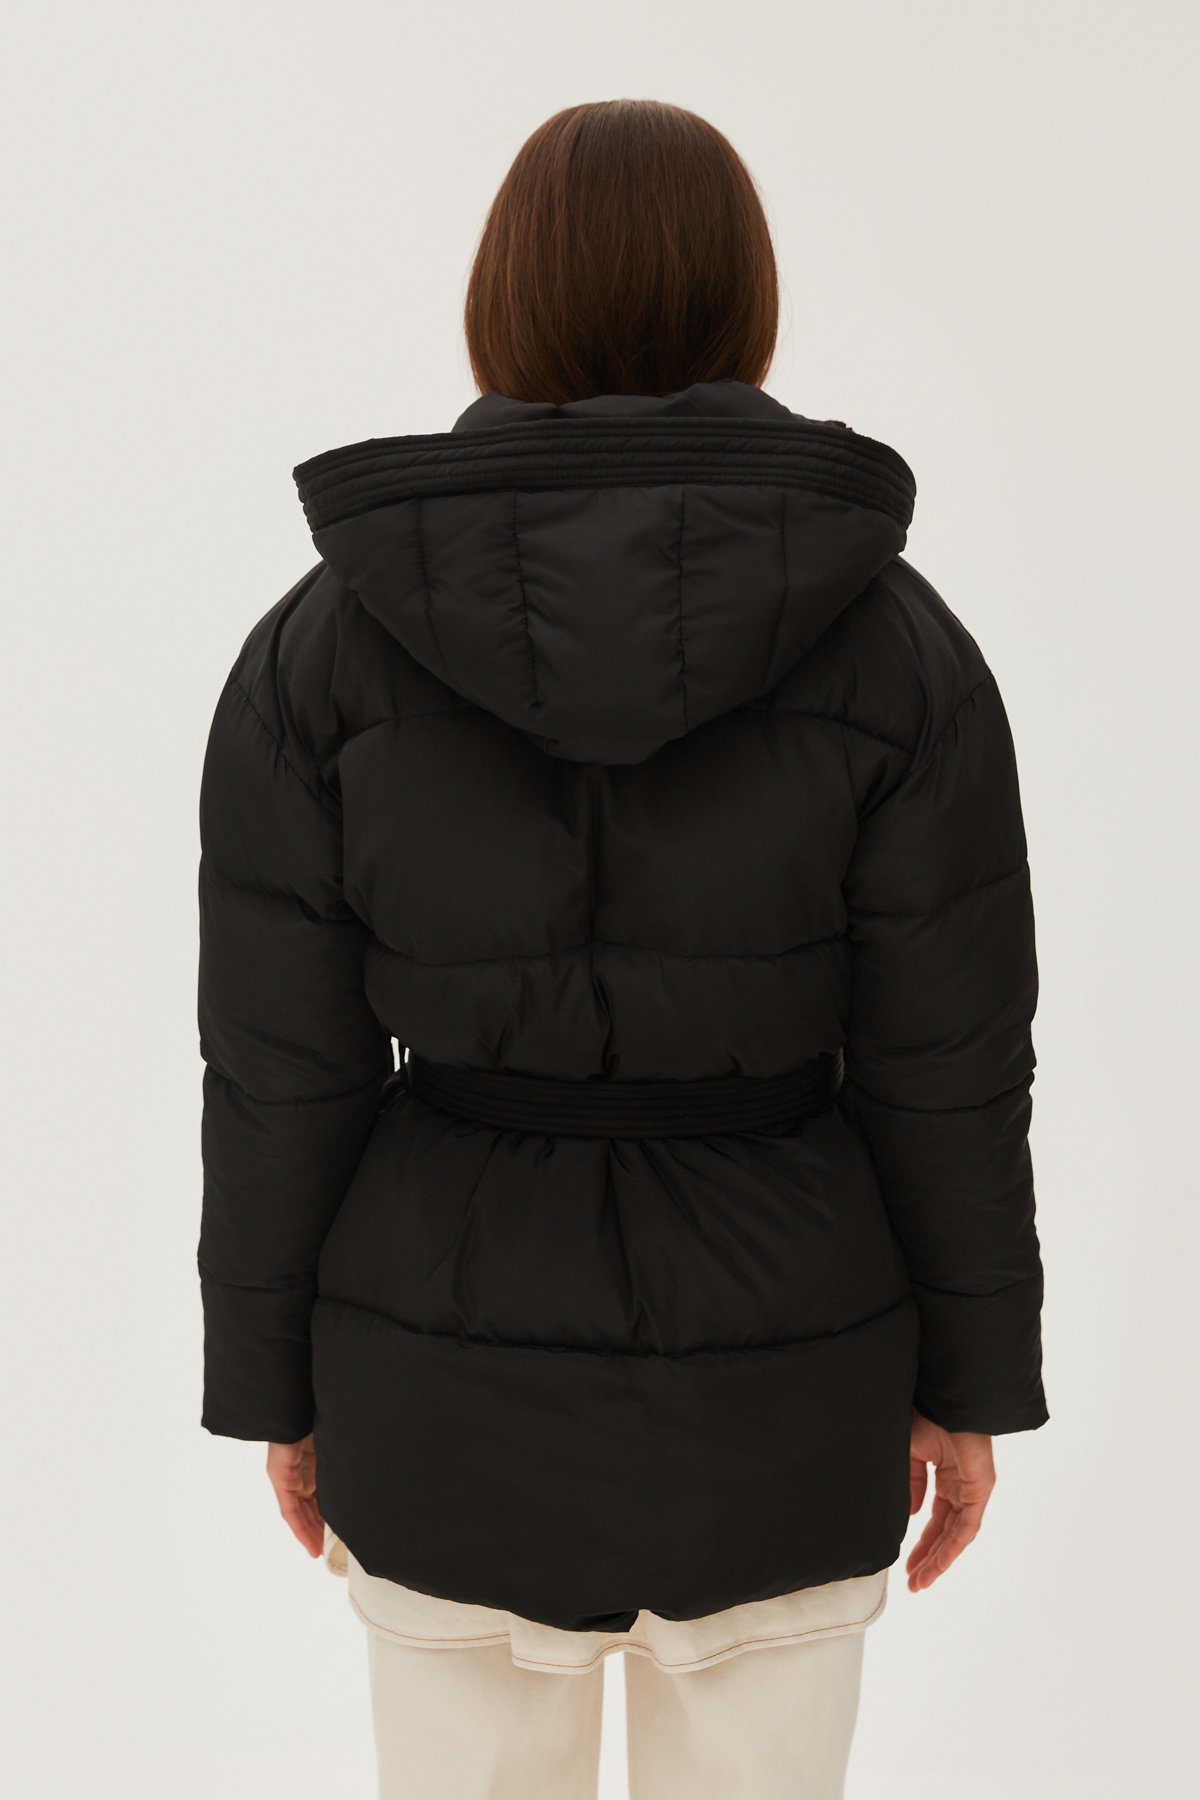 Black quilted jacket with a detachable hood, photo 6